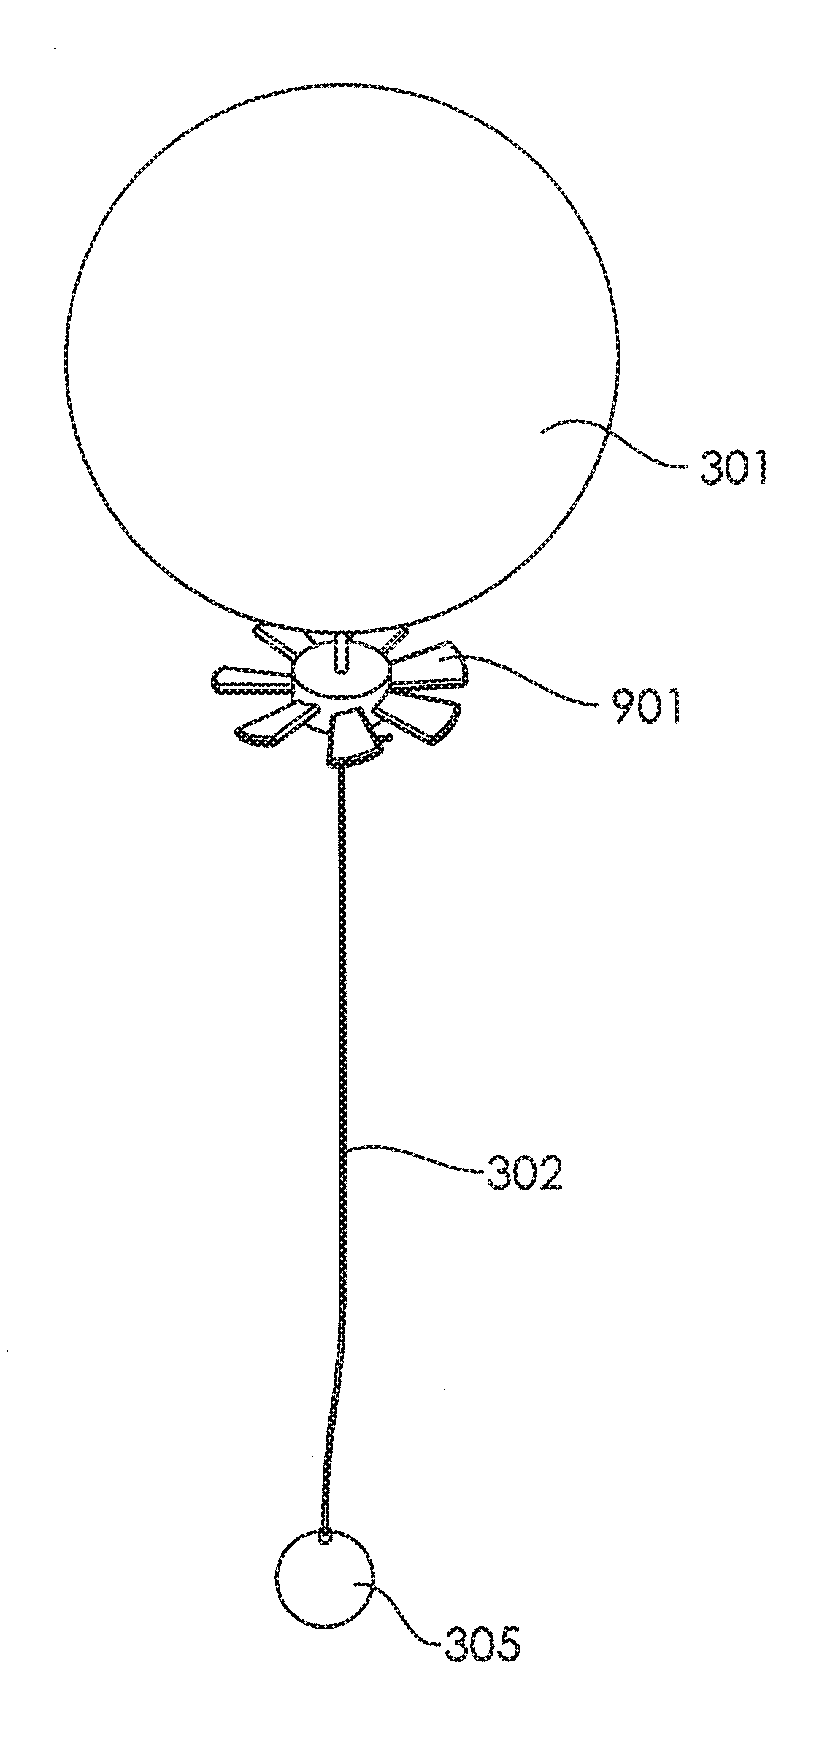 Balloon play apparatus or the like